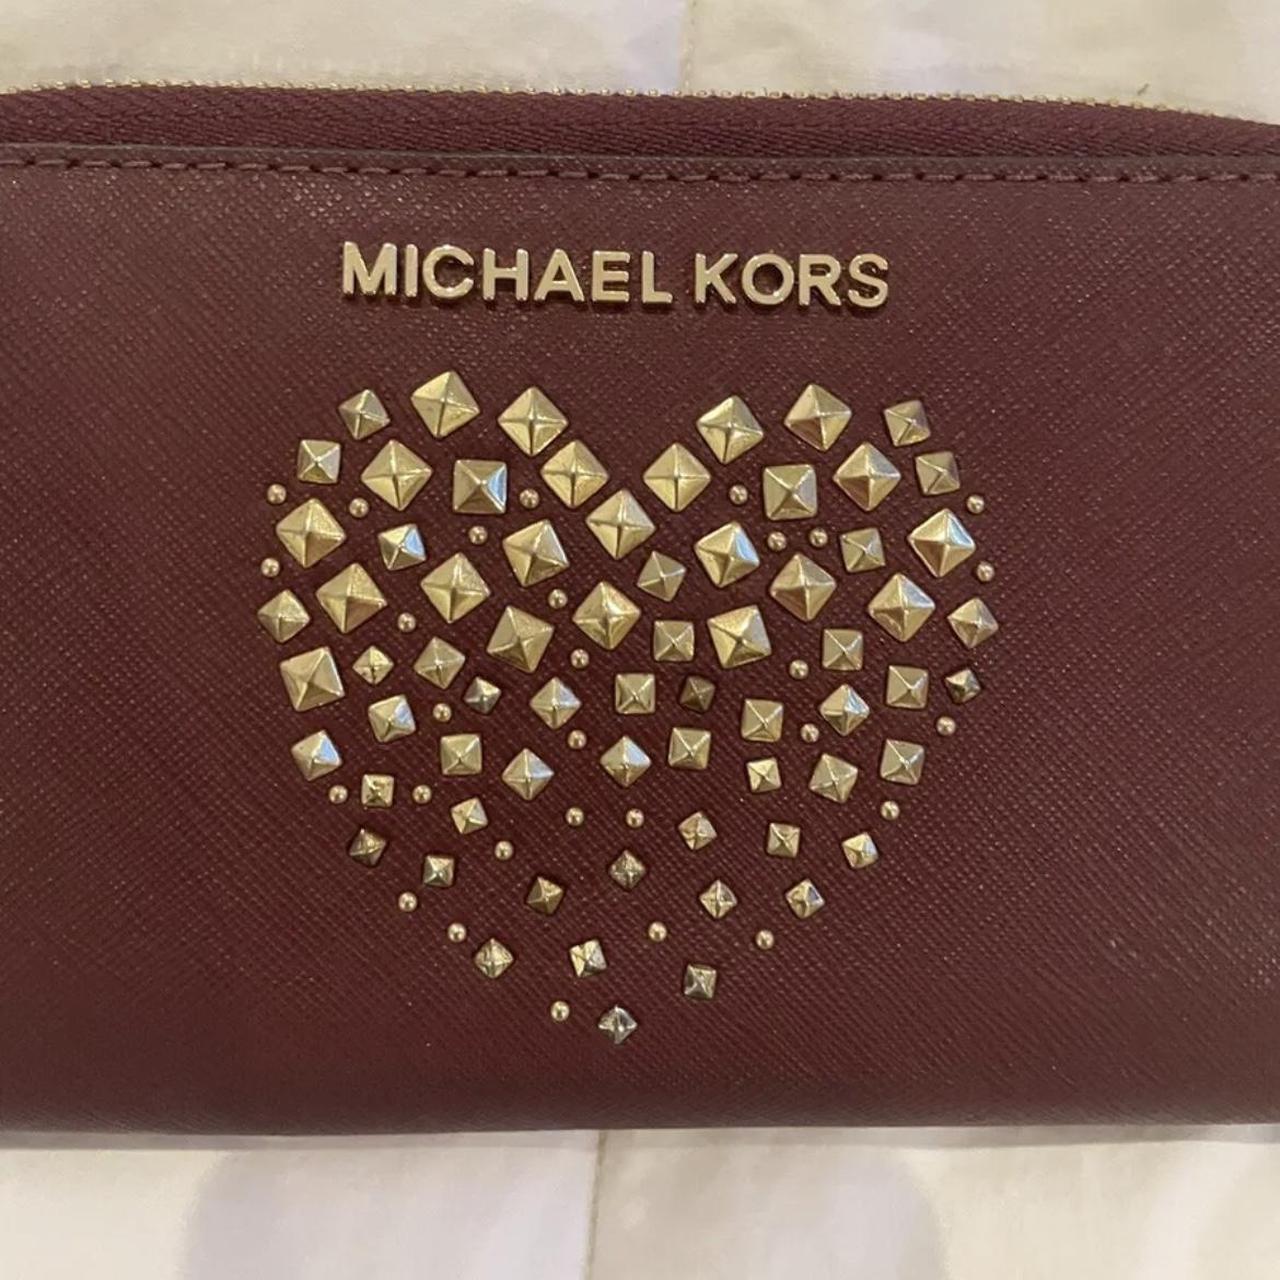 PINK MICHAEL KORS WALLET 💗💕 Great condition, used - Depop